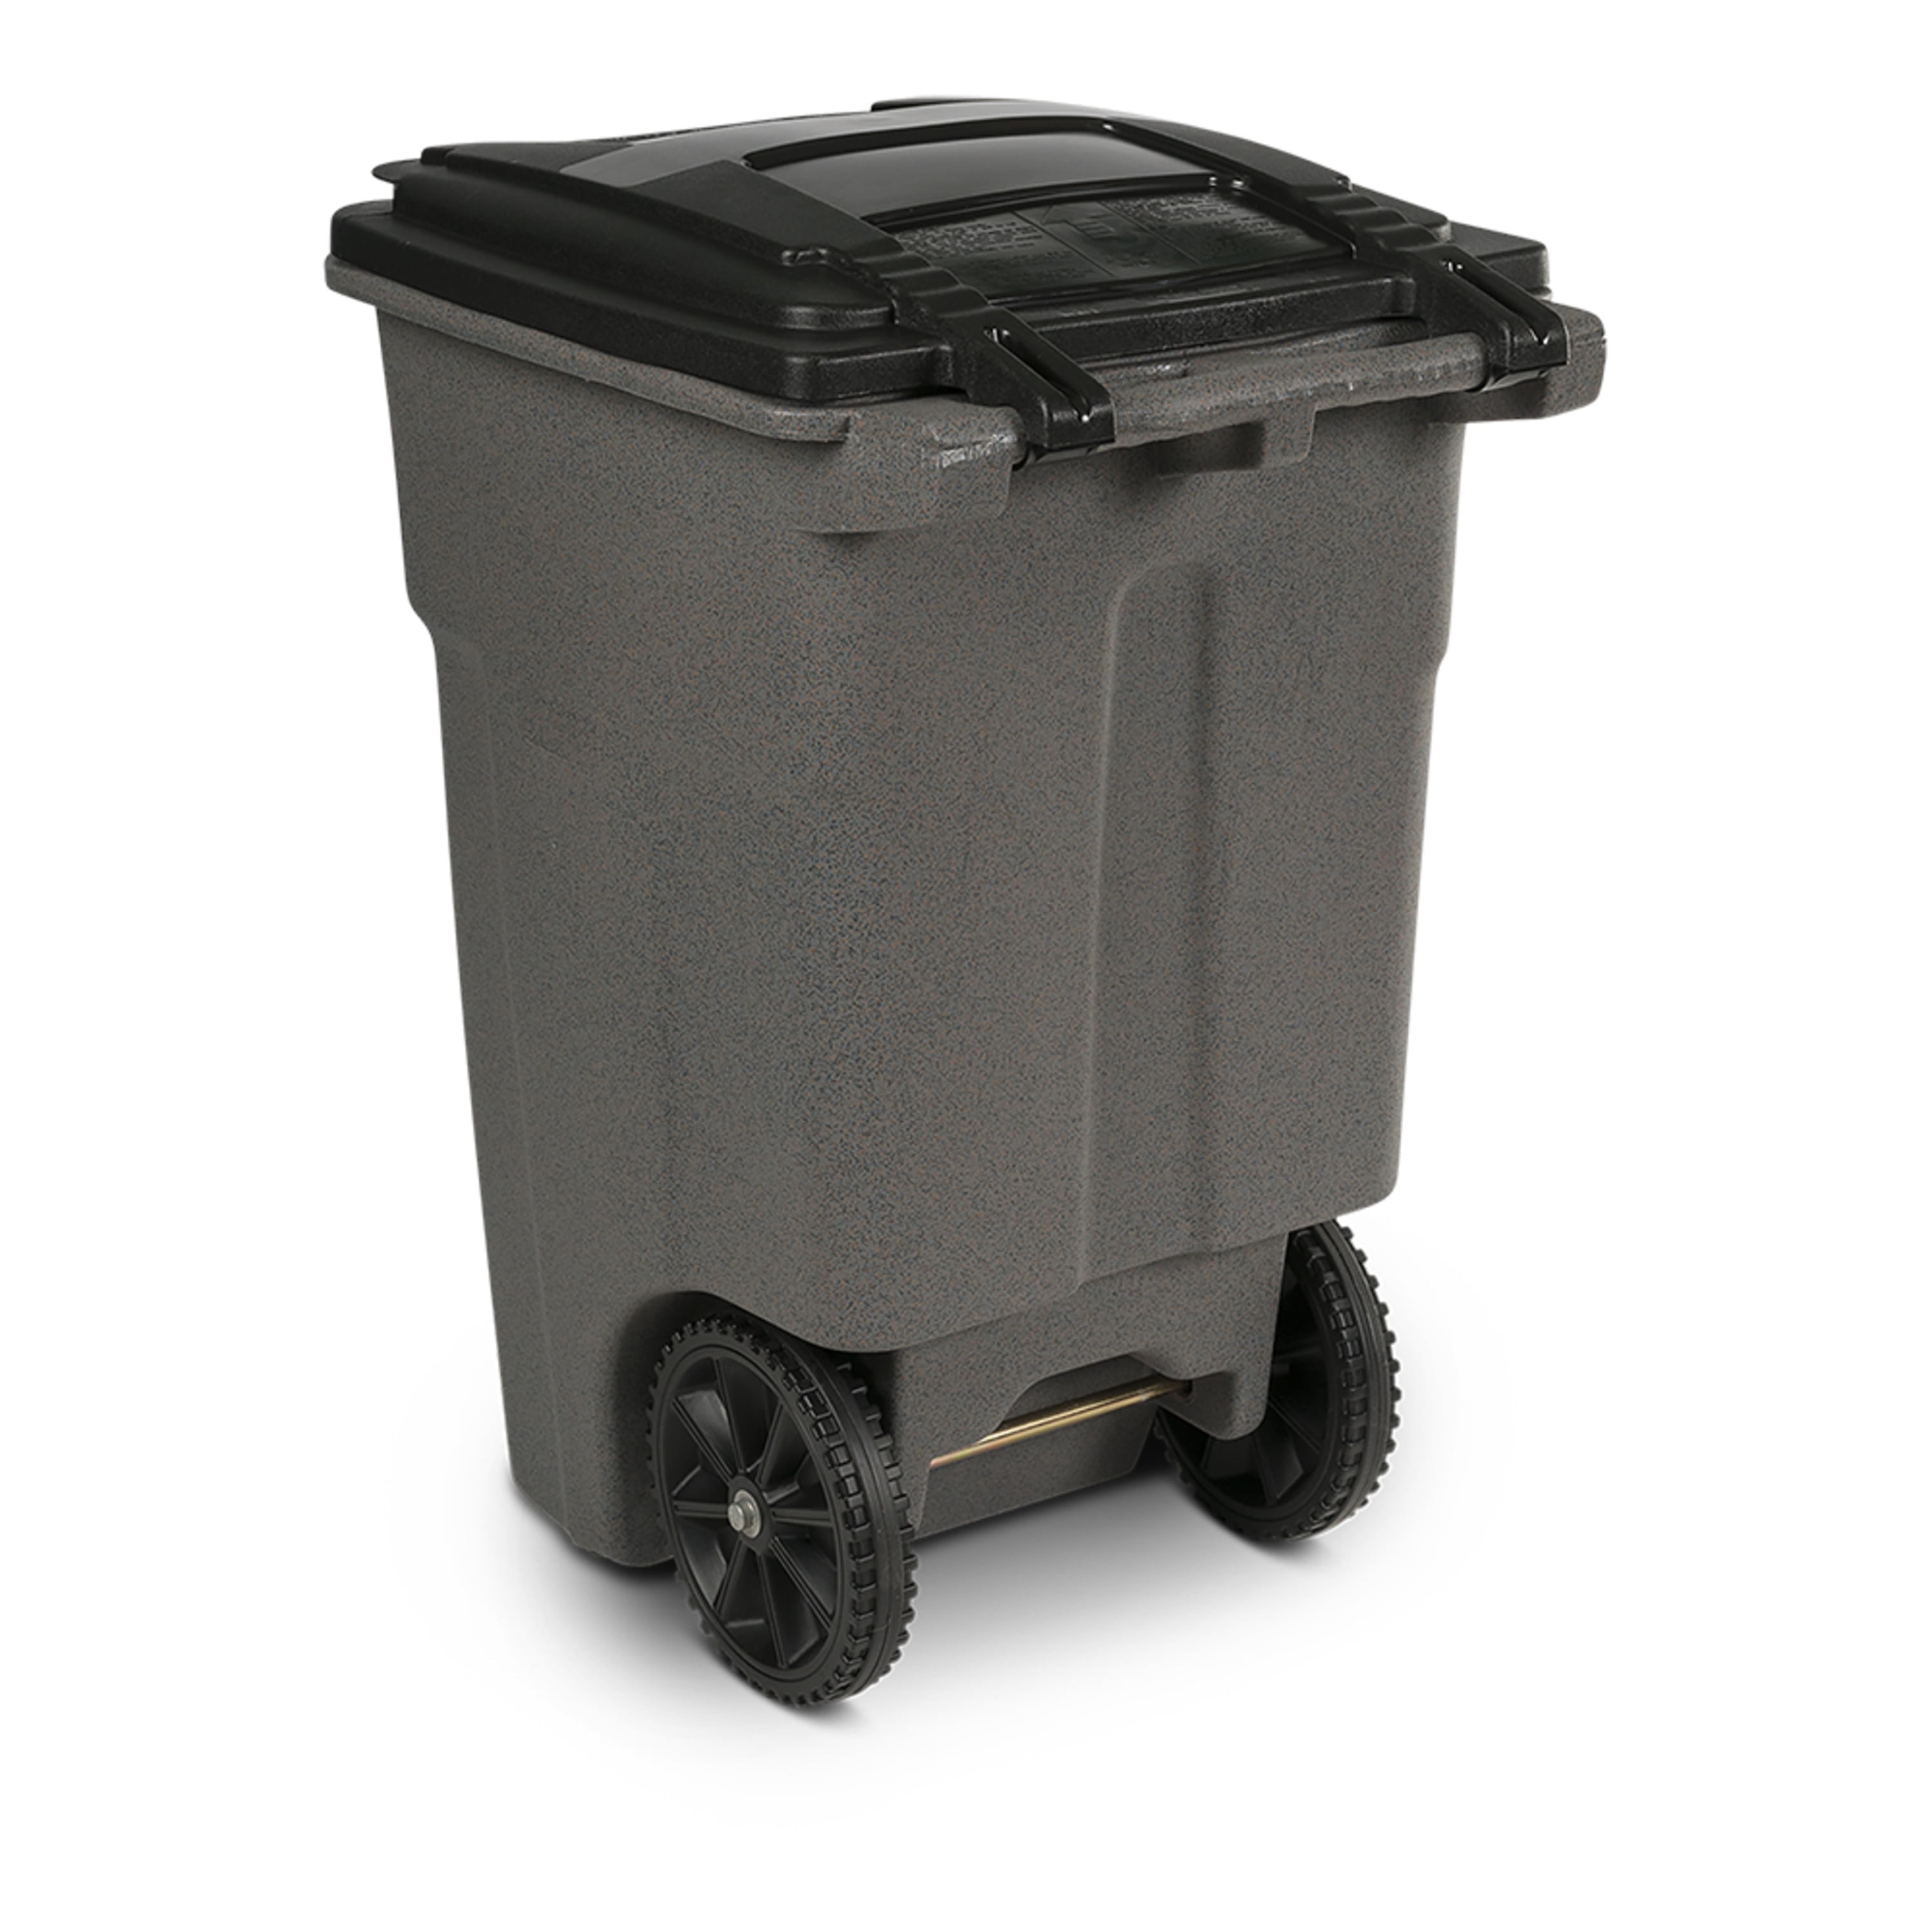 Toter Trash Can Brownstone with Wheels and 48 Gallon - Walmart.com